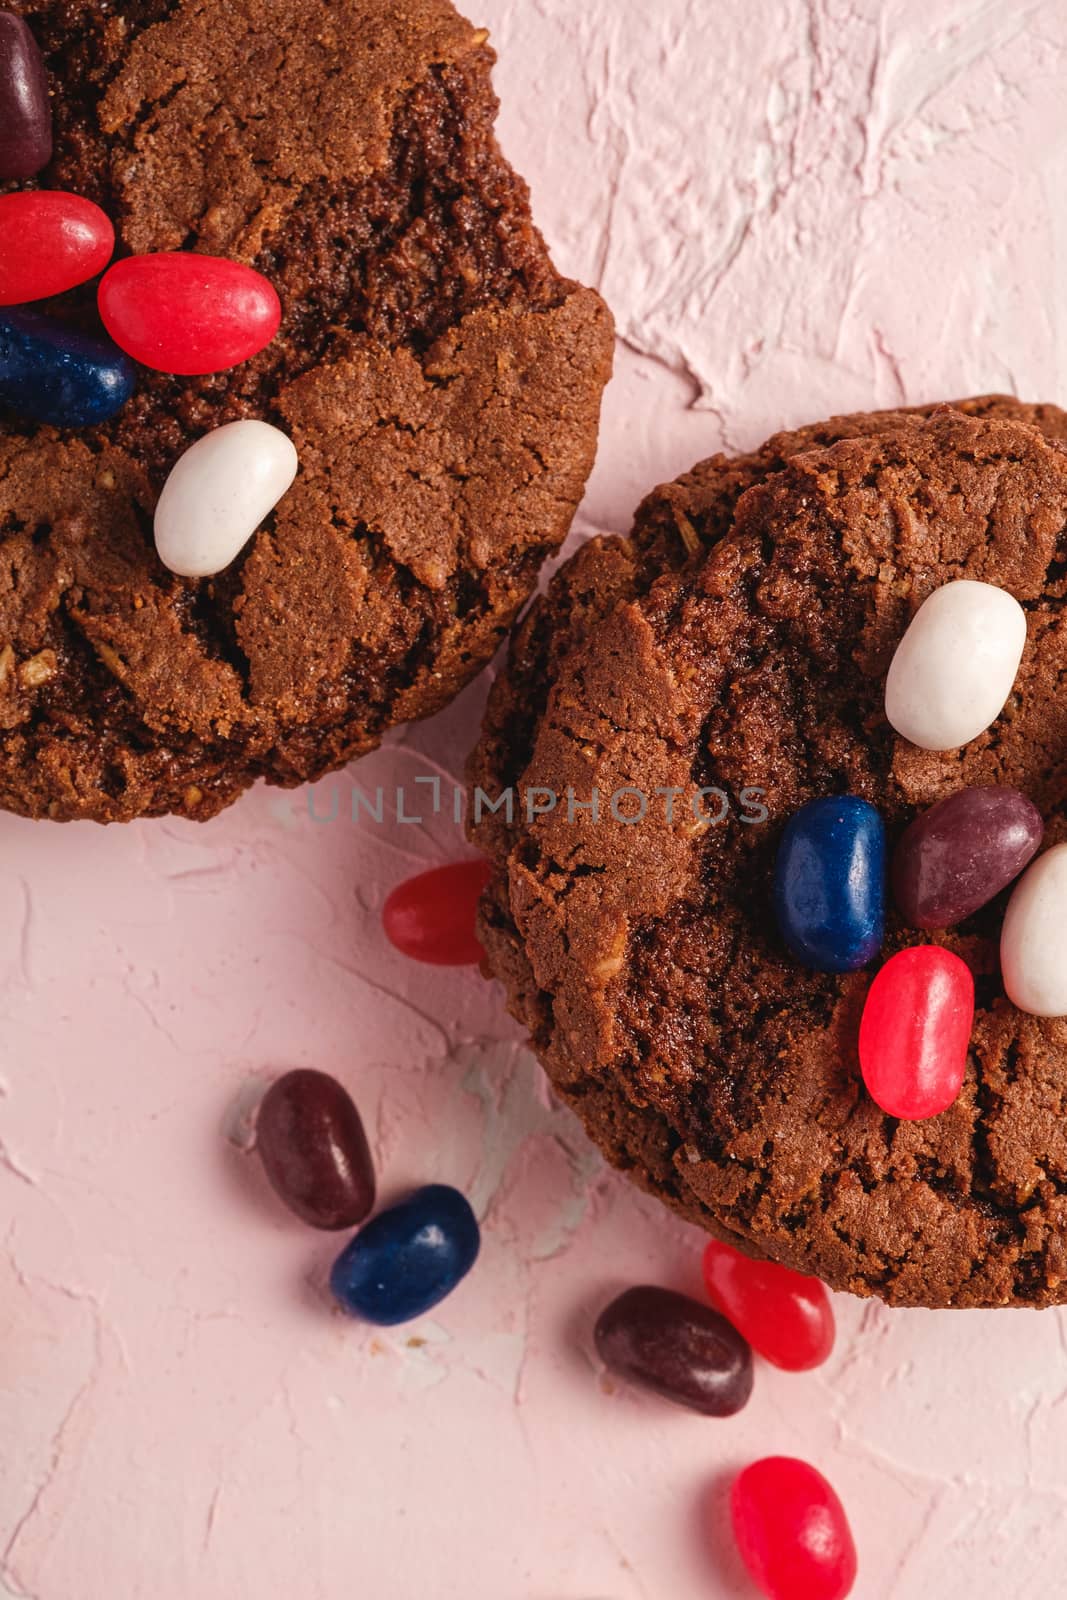 Homemade oat chocolate cookies with cereal with juicy jelly beans on textured pink background, top view macro